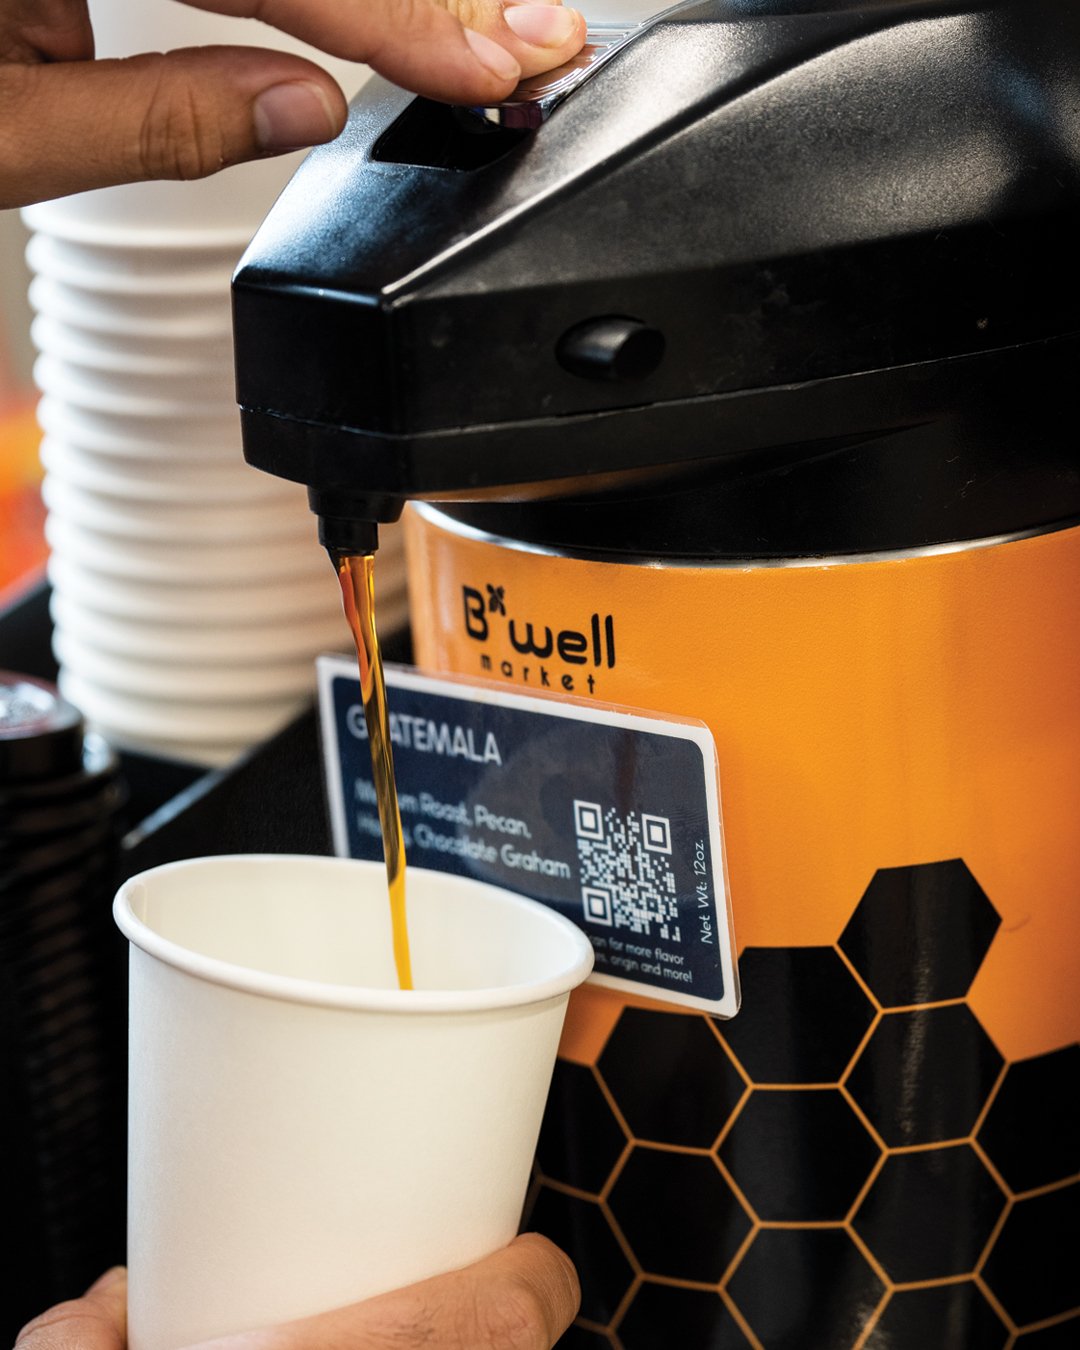 ☕️🌟 Need a little Monday motivation to kickstart your week? Look no further than b'well marketWe've got a variety of coffee options to fuel your day and get you on the right track.